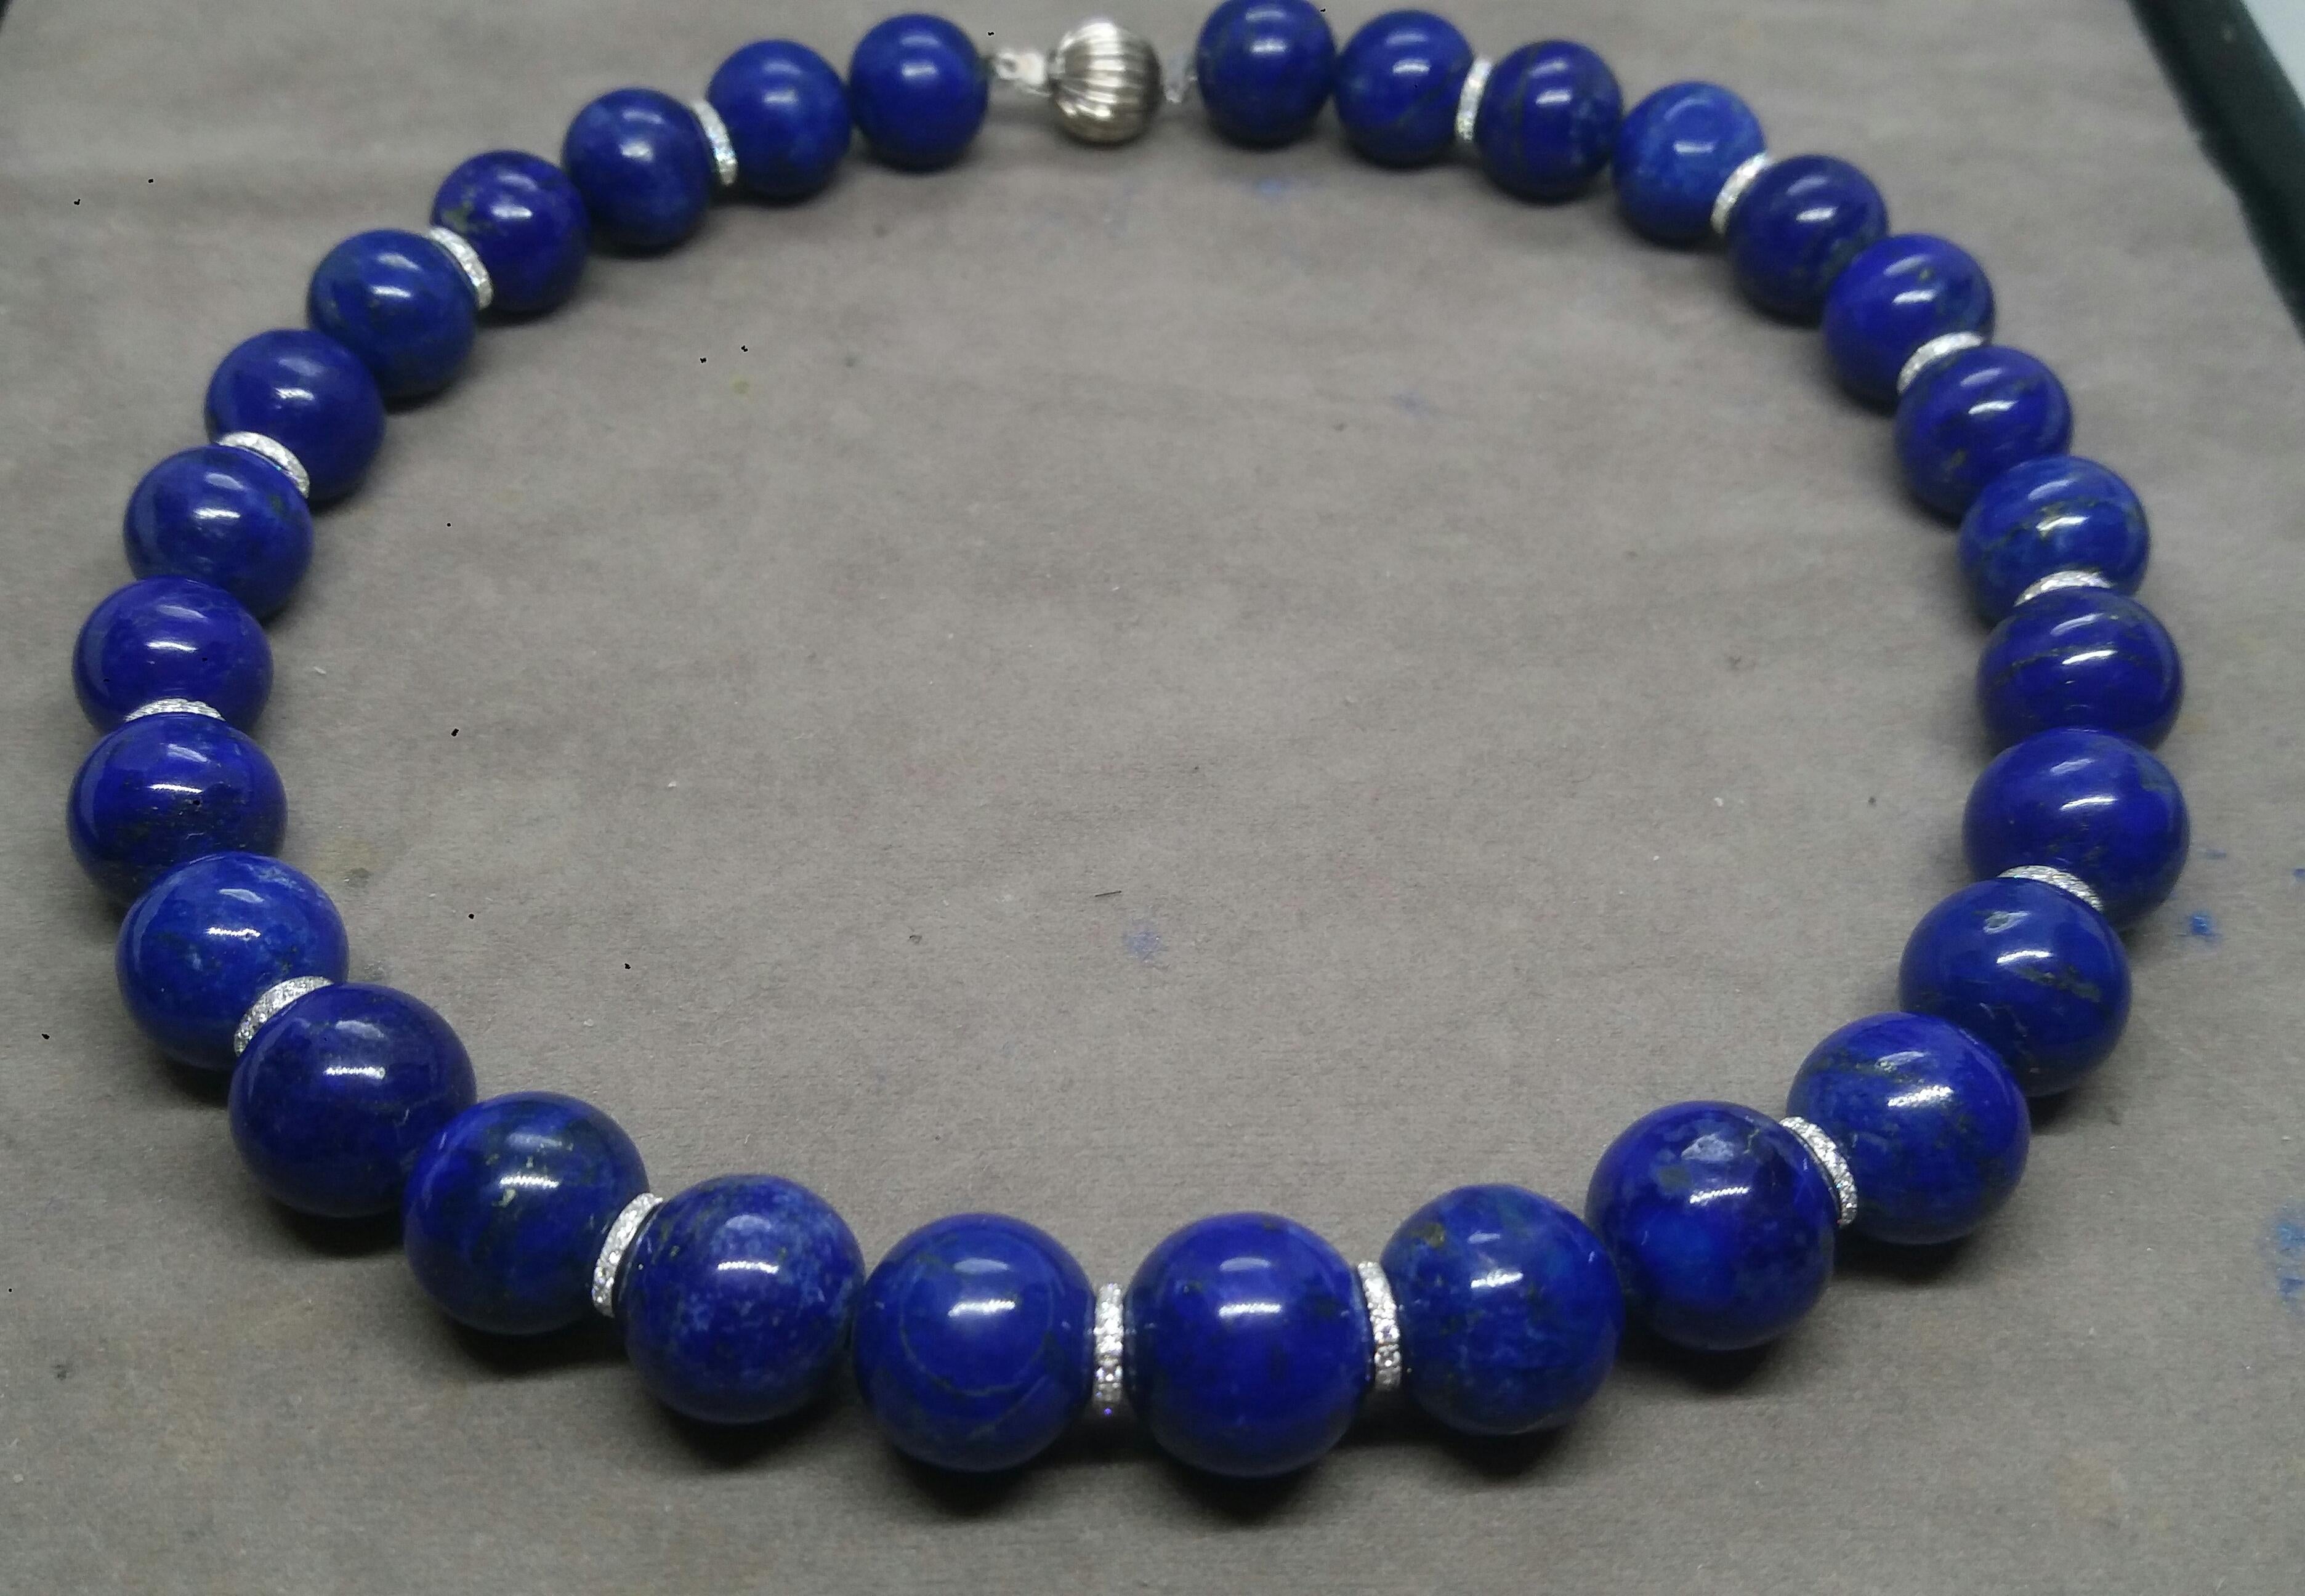 Natural Color Afghanistan Lapis Lazuli Round Beads Necklace strung with 14k White Gold and Diamonds spacers for a total of more than 1 carat of full cut diamonds..Round Shape Clasp also in 14K white gold.

In 1978 our workshop started in Italy to